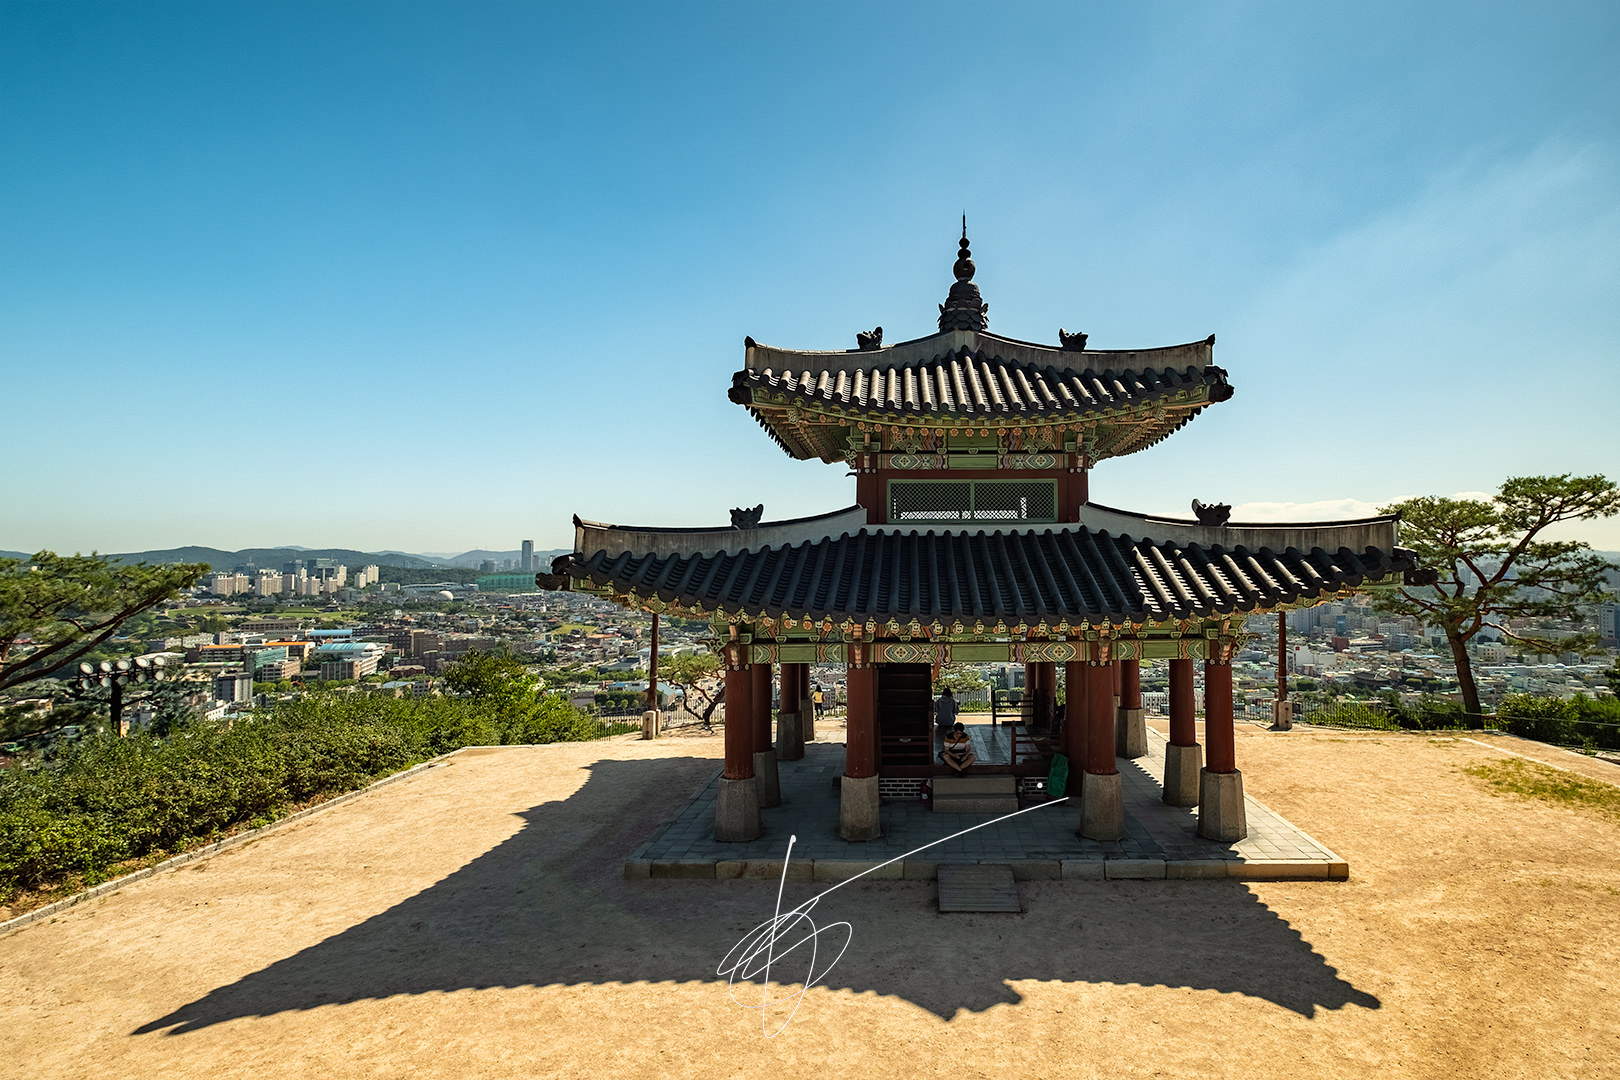 The resting place on top of the walls of Suwon fortress, with a panoramic view of the city